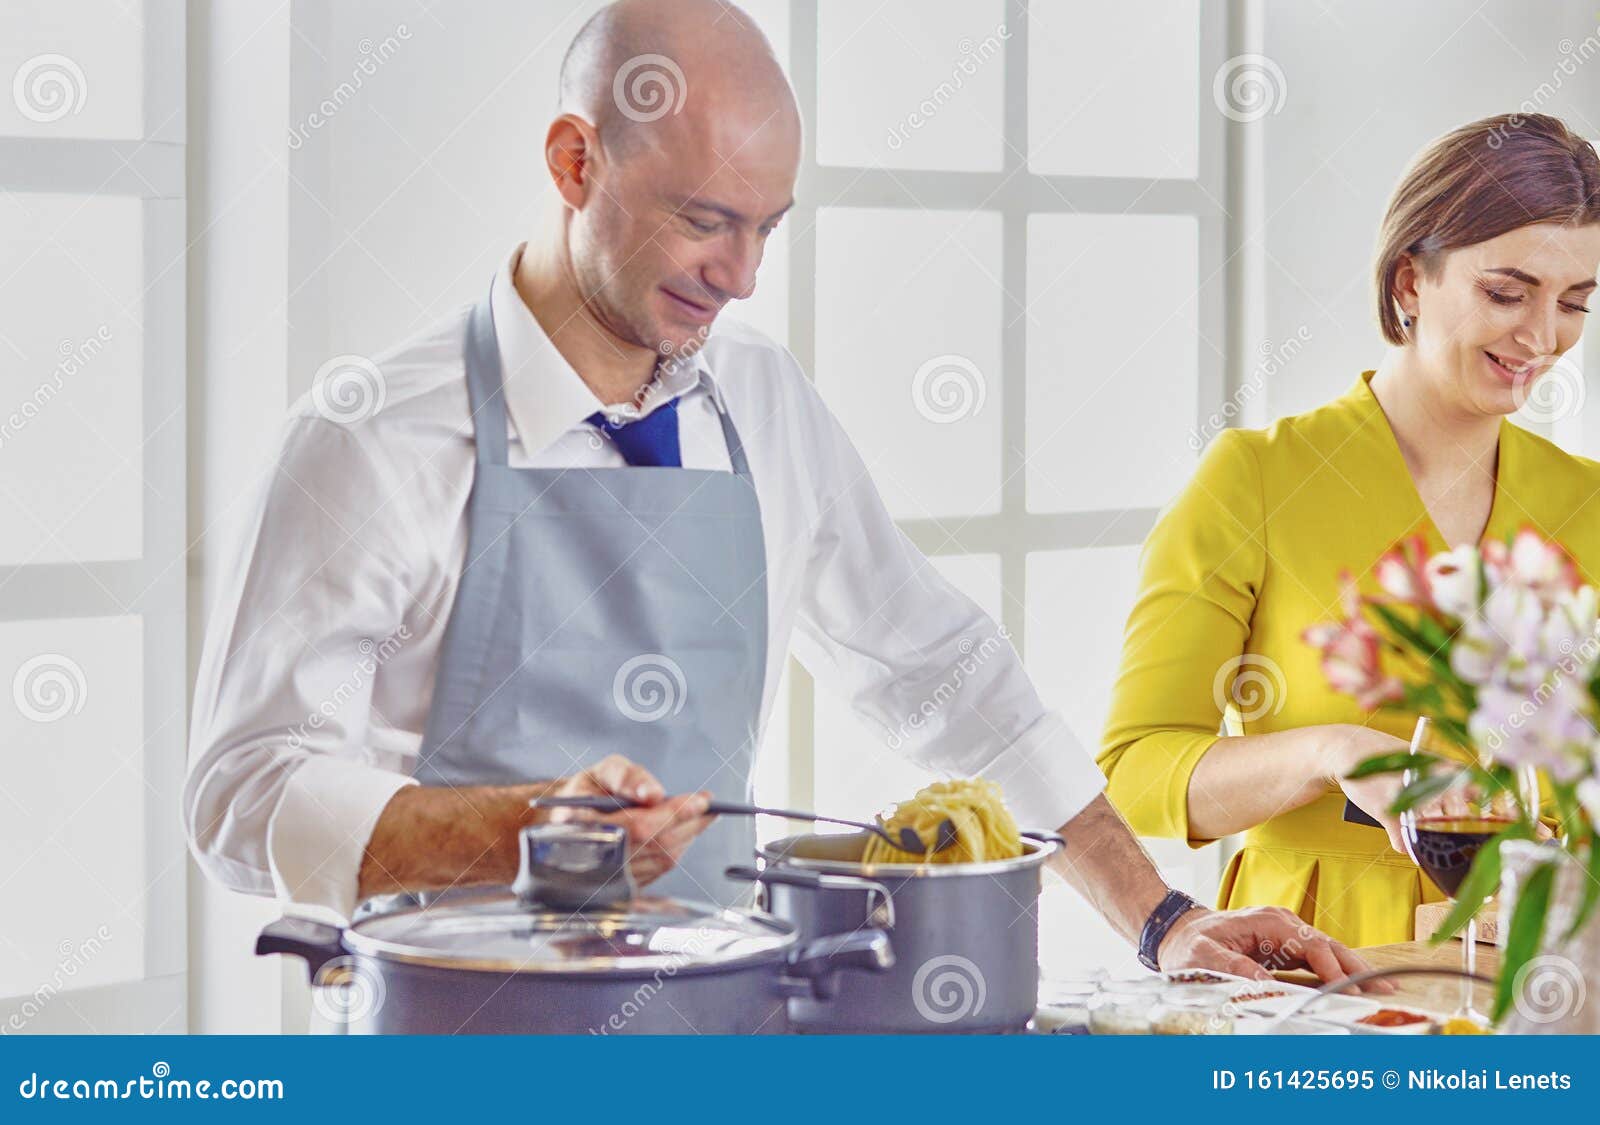 Smiling Young Couple Cooking Food In The Kitchen Stock Image Image Of